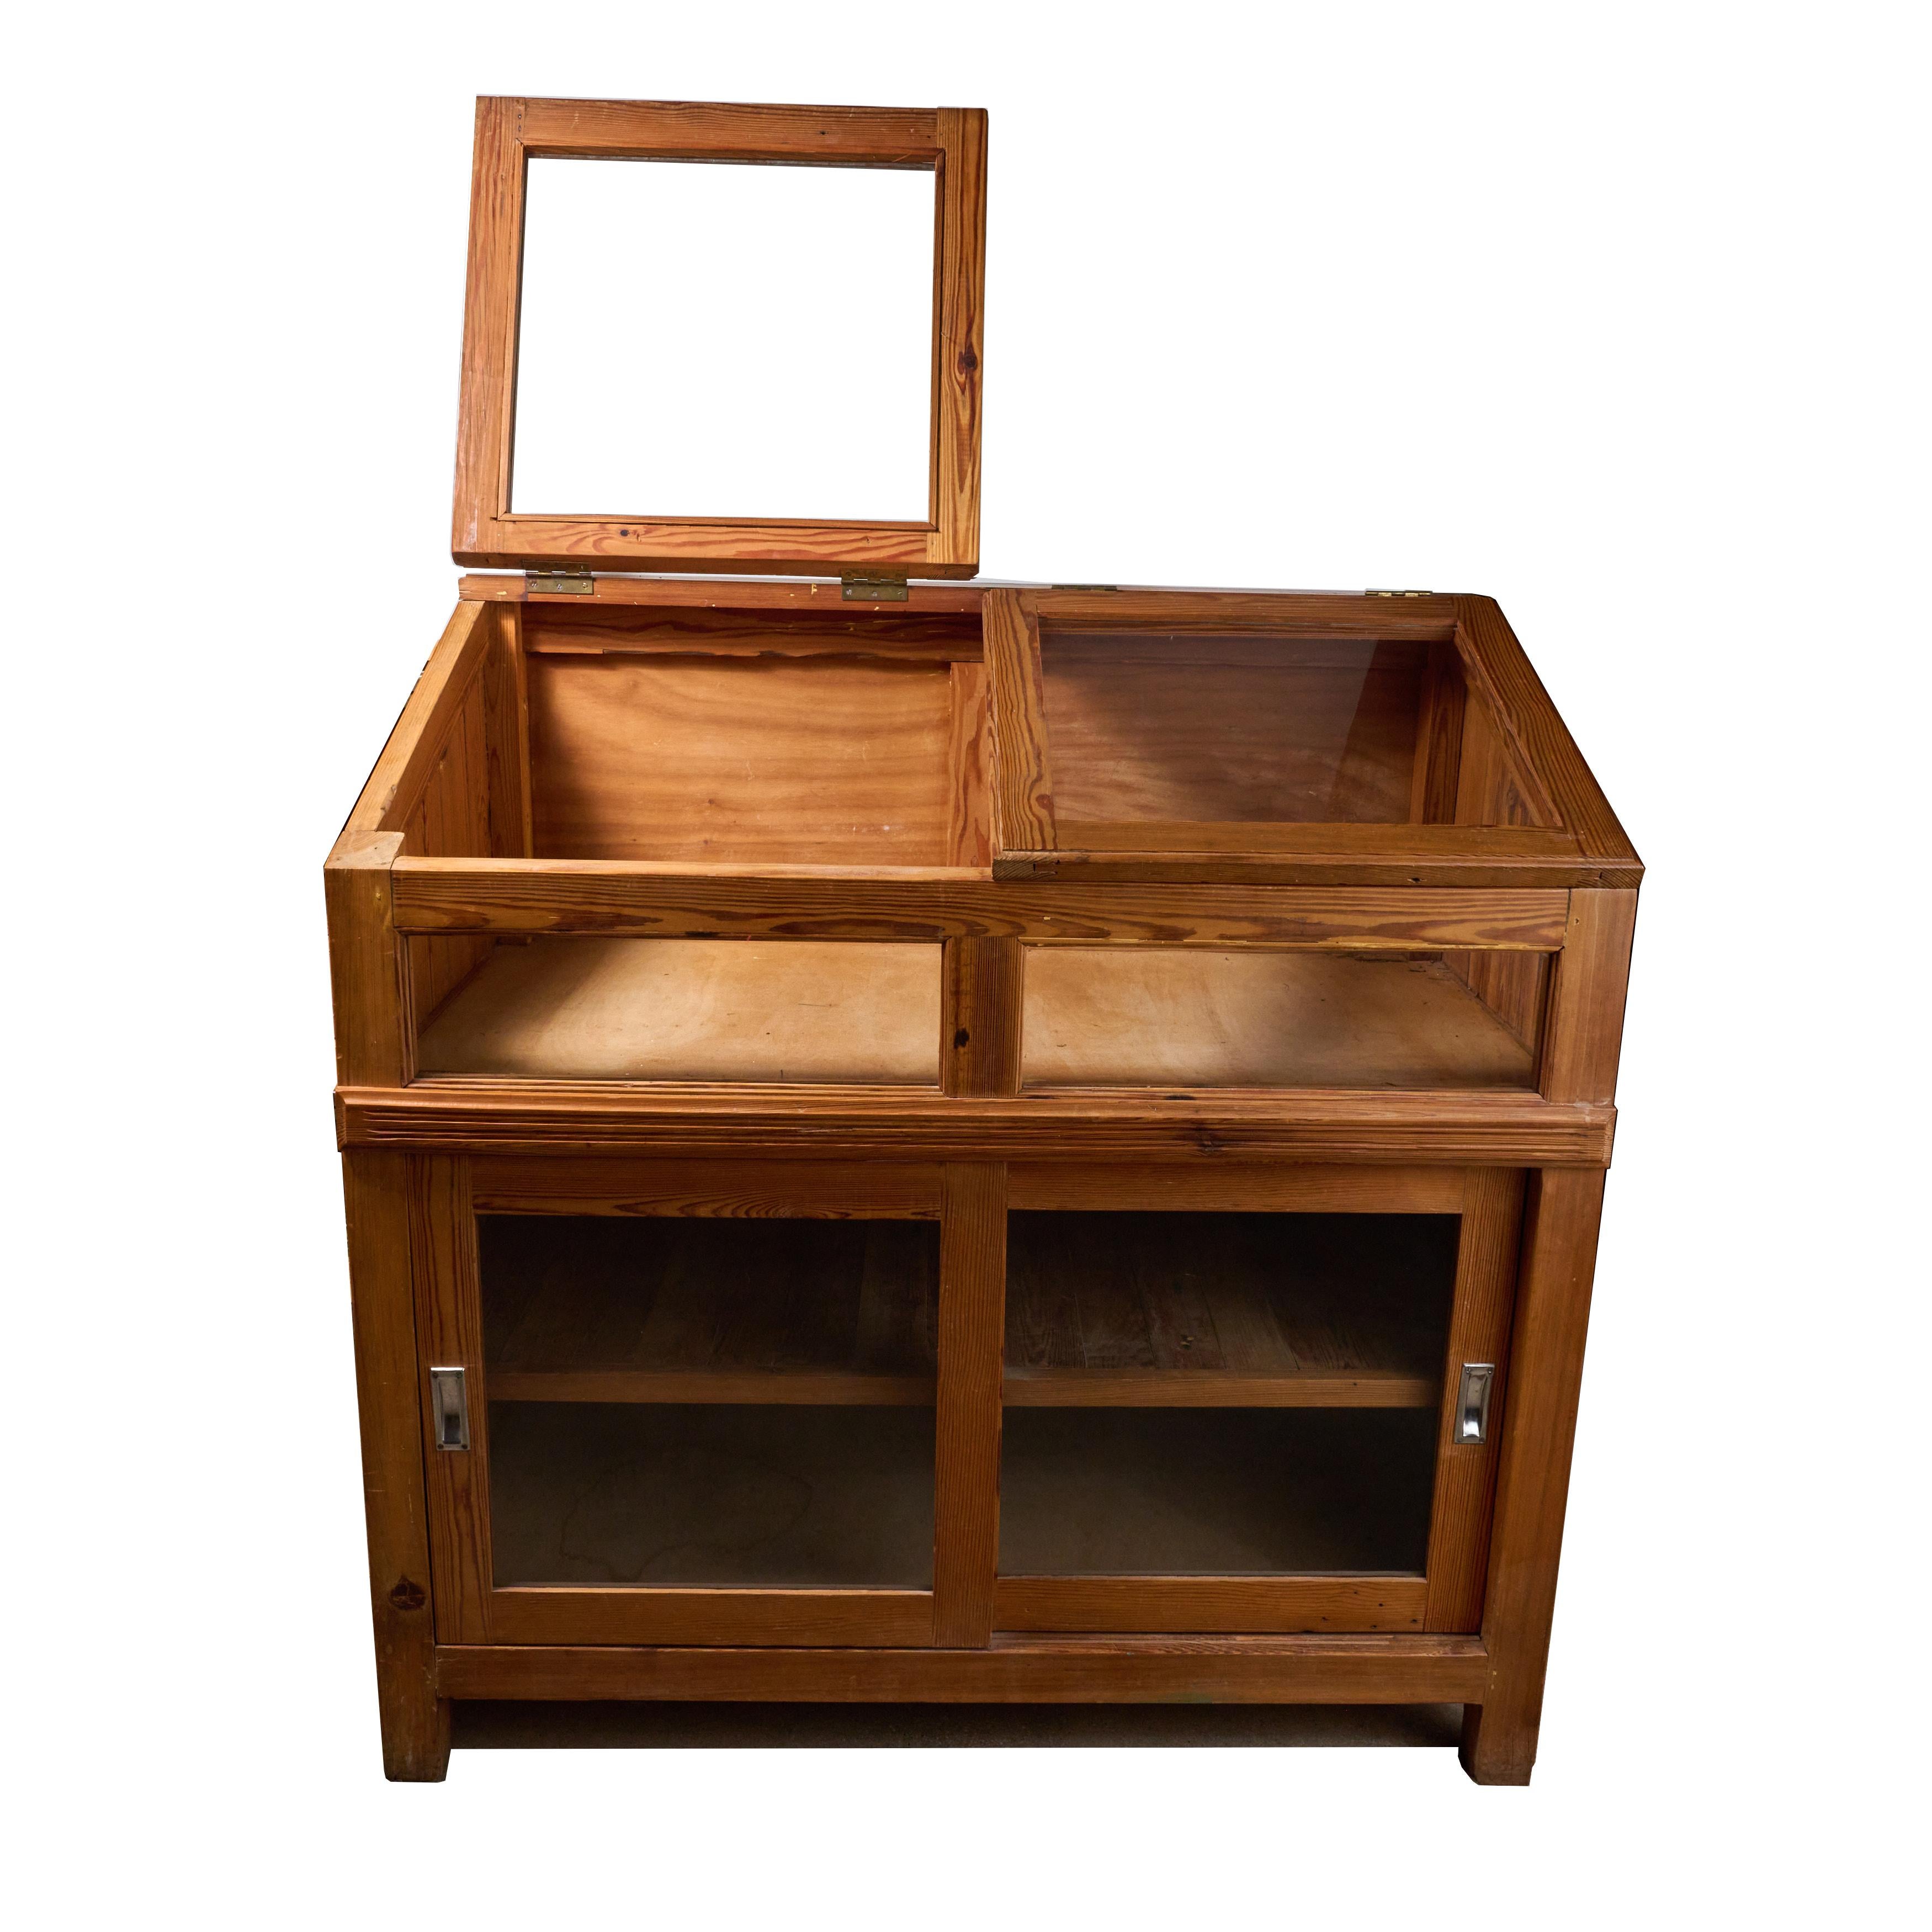 Early 20th Century Argentine Pitch Pine and Glass Display Case For Sale